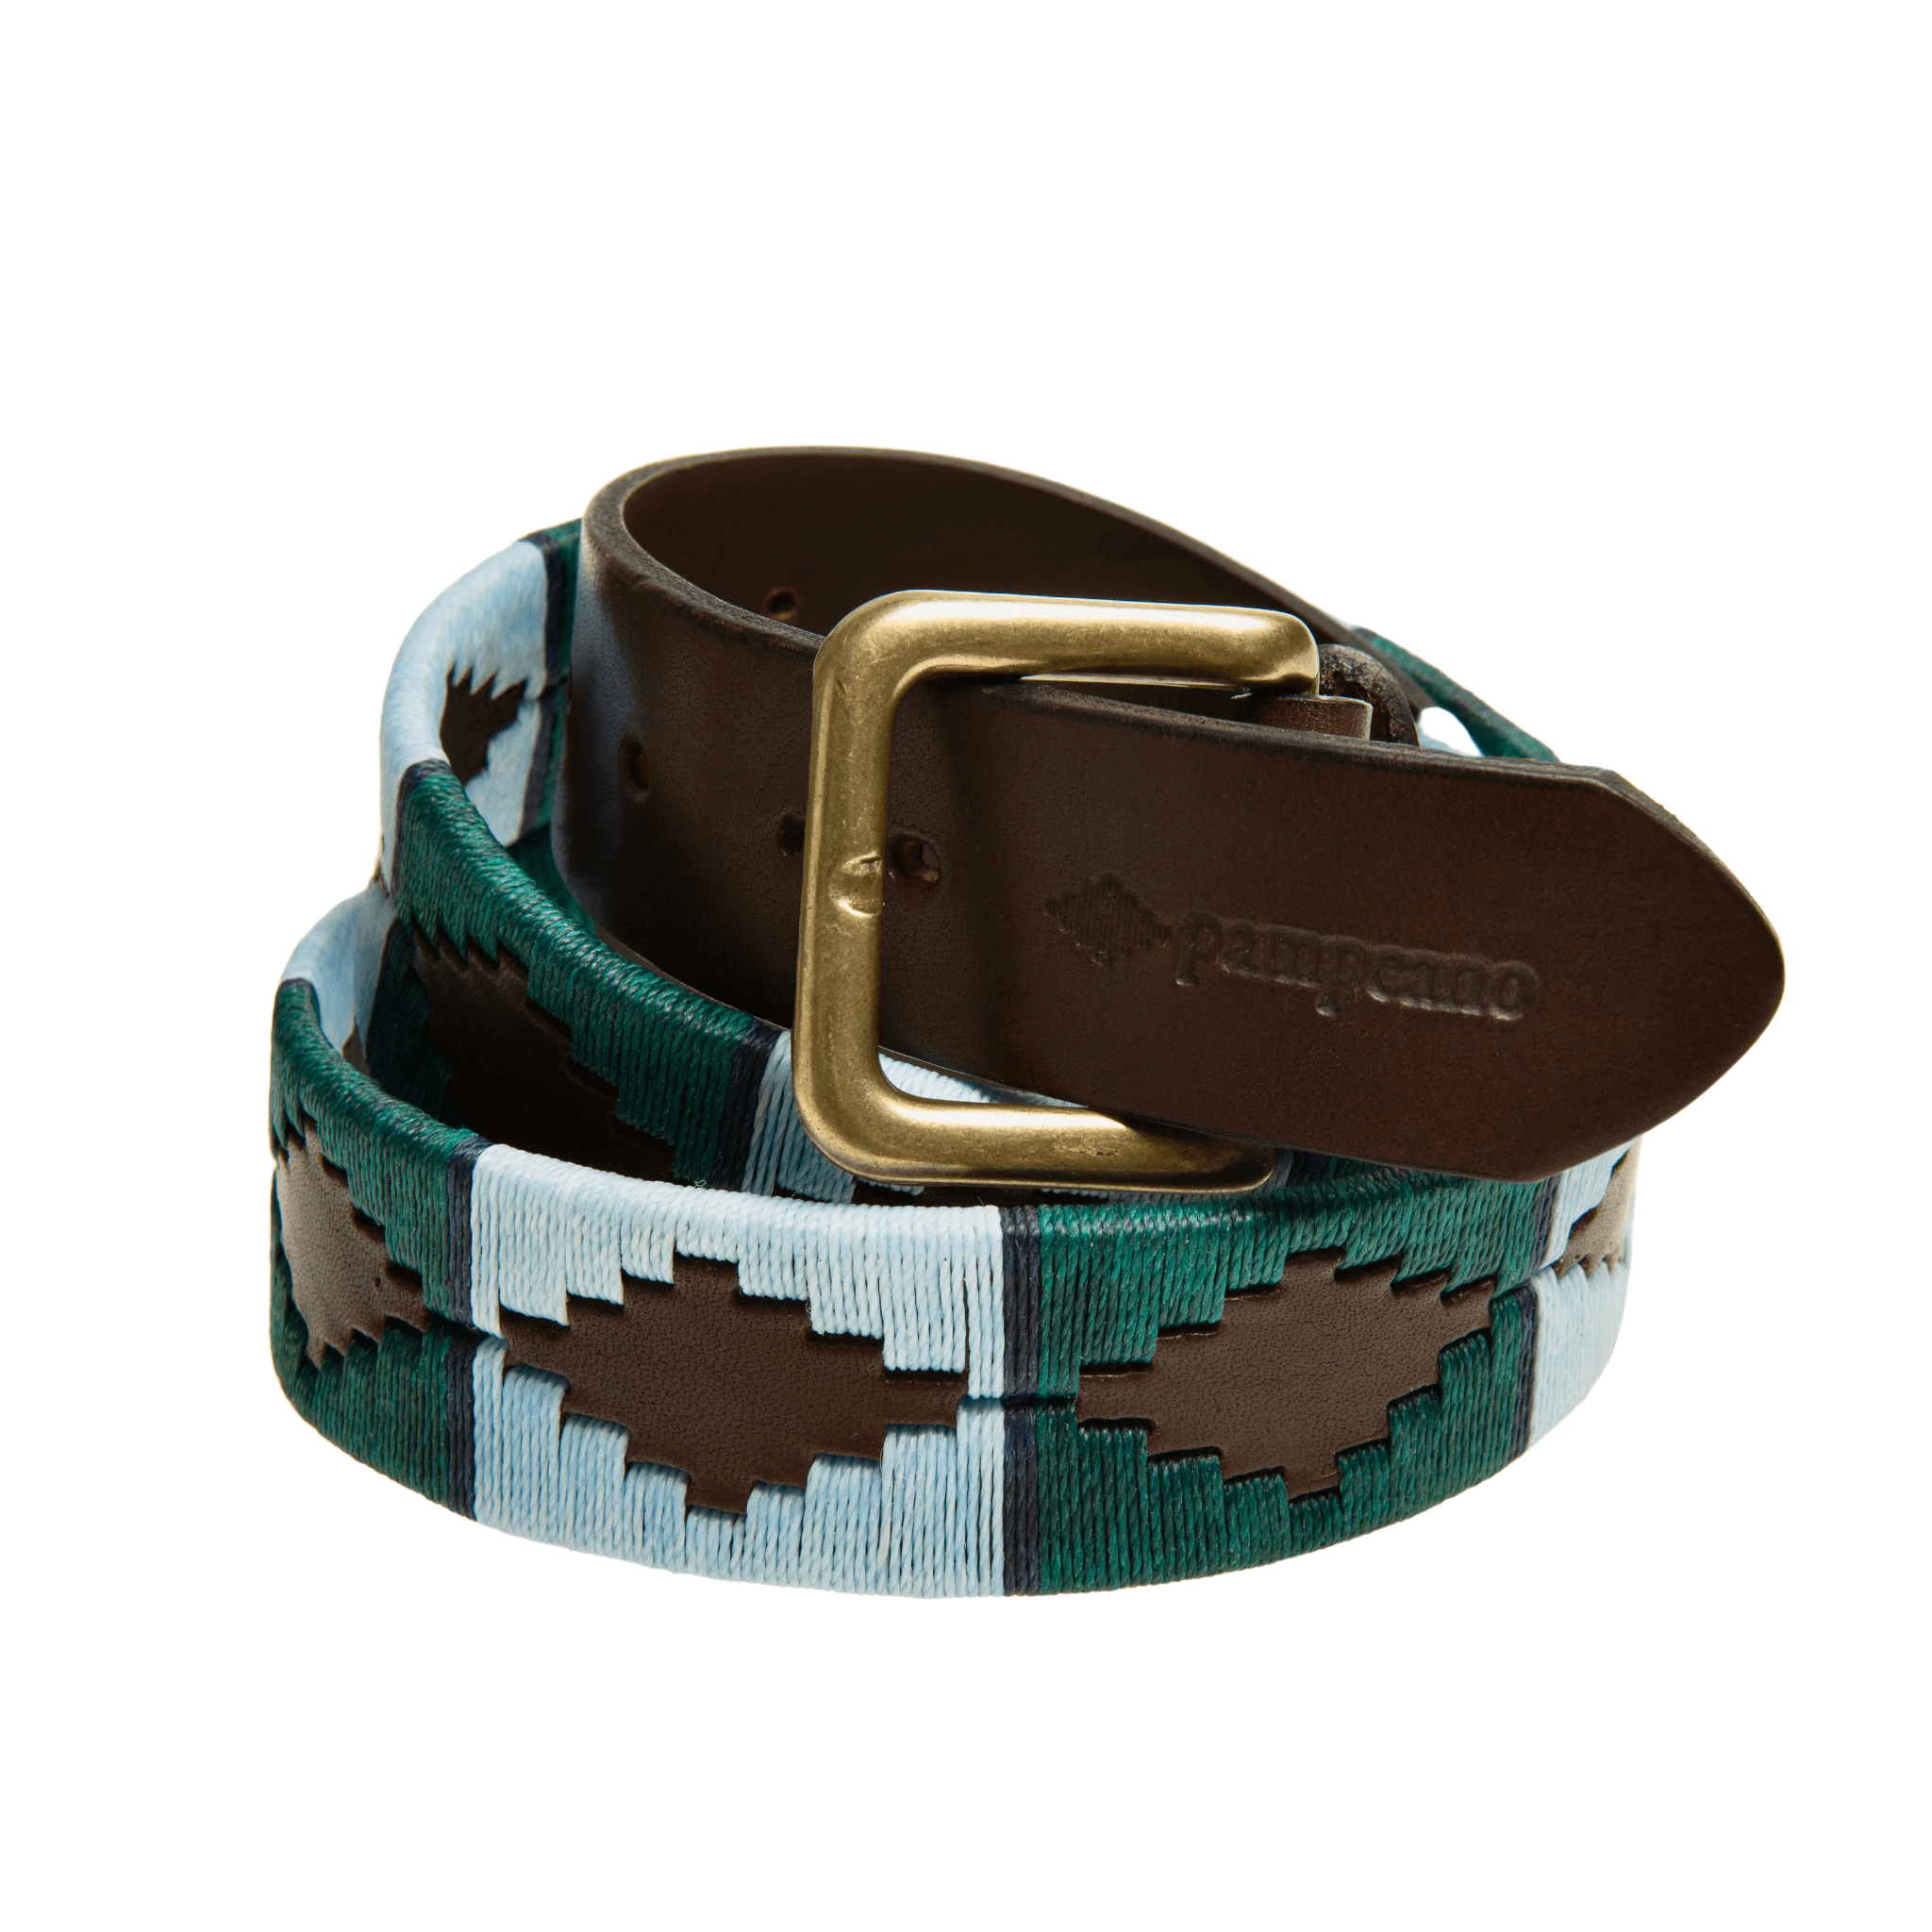 The exclusive Country Direct & Pampeano Royal Signals Leather Polo Belt, featuring light-blue, green, and brown wax thread detailing. 